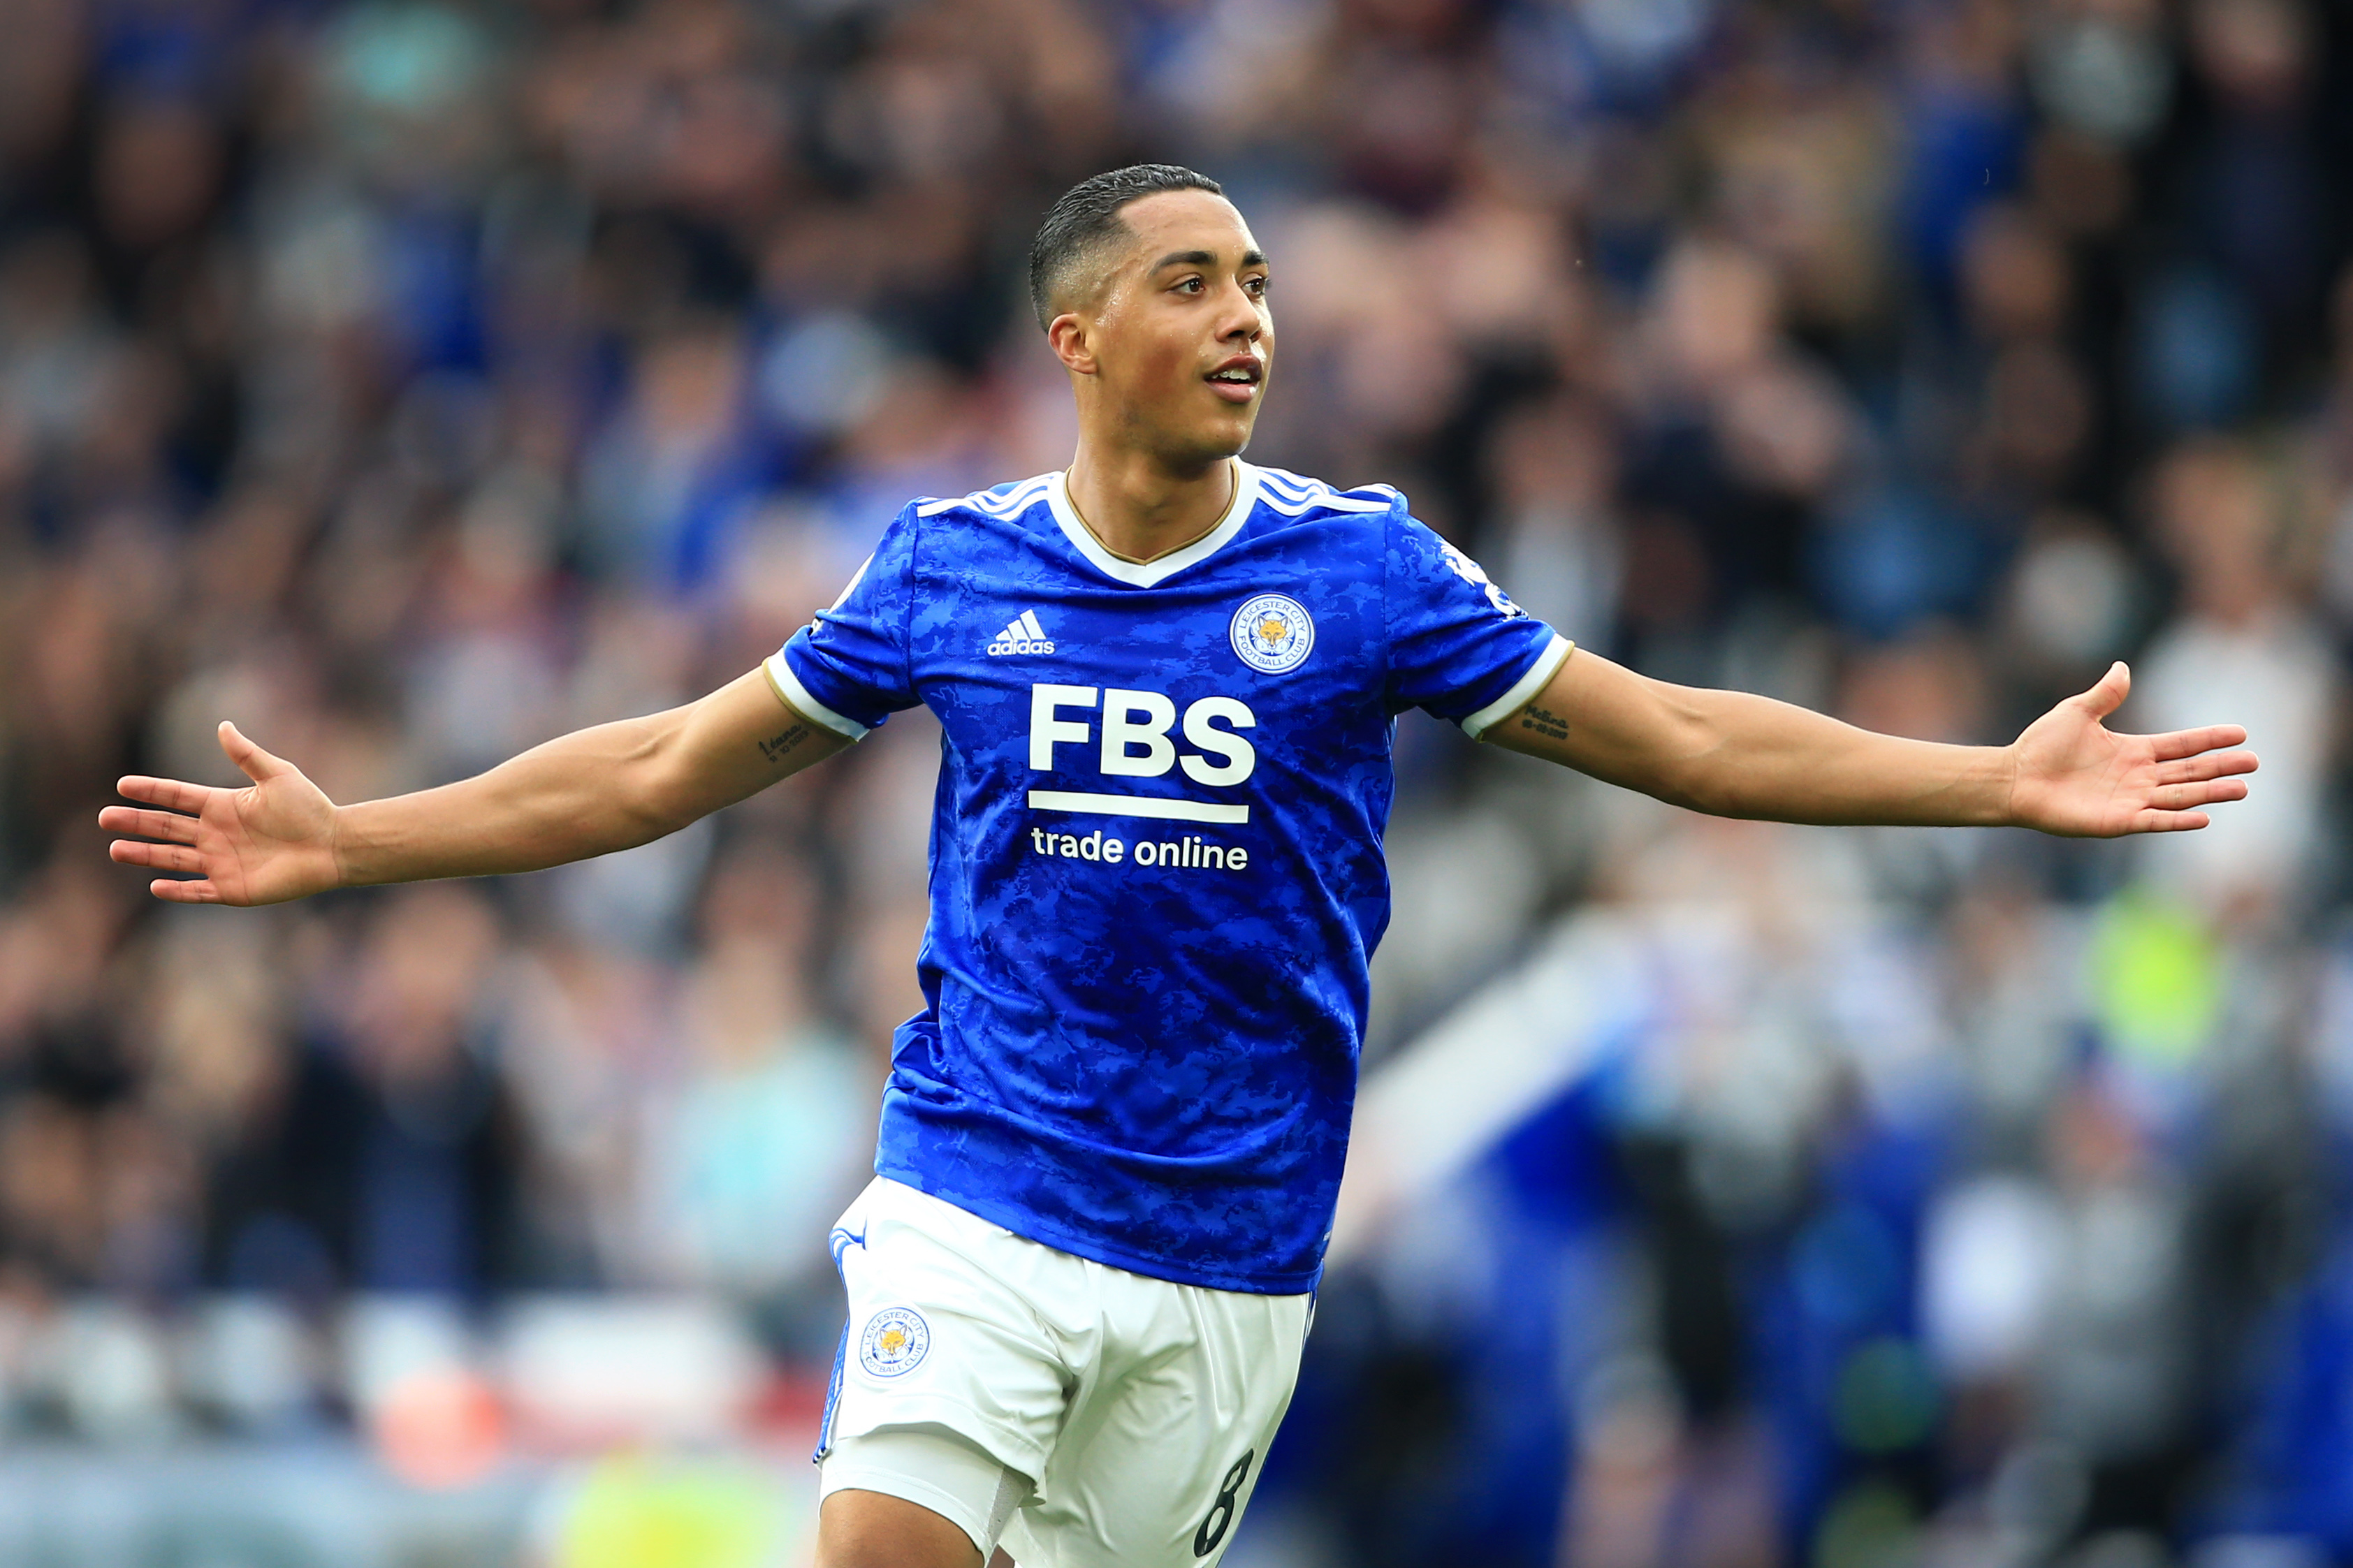 Arsenal agree terms with long-term transfer target Tielemans